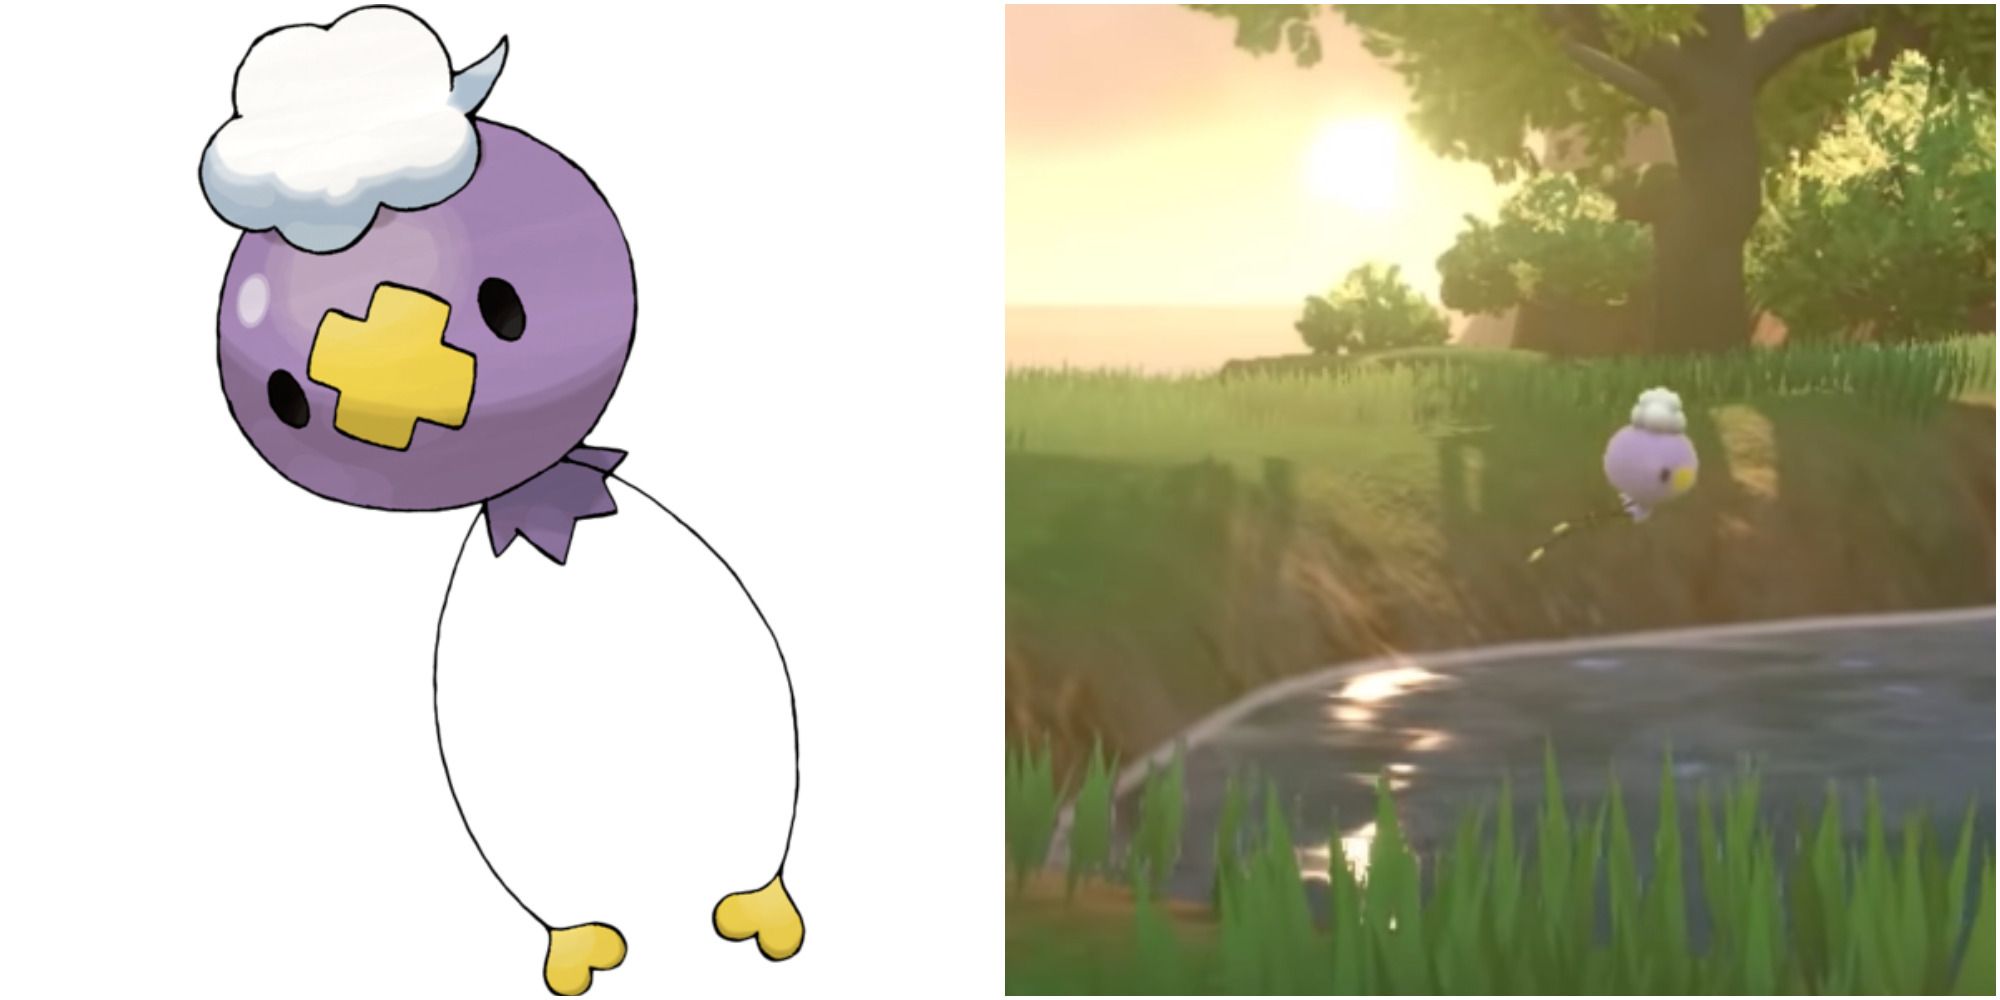 drifloon art and trailer appearance